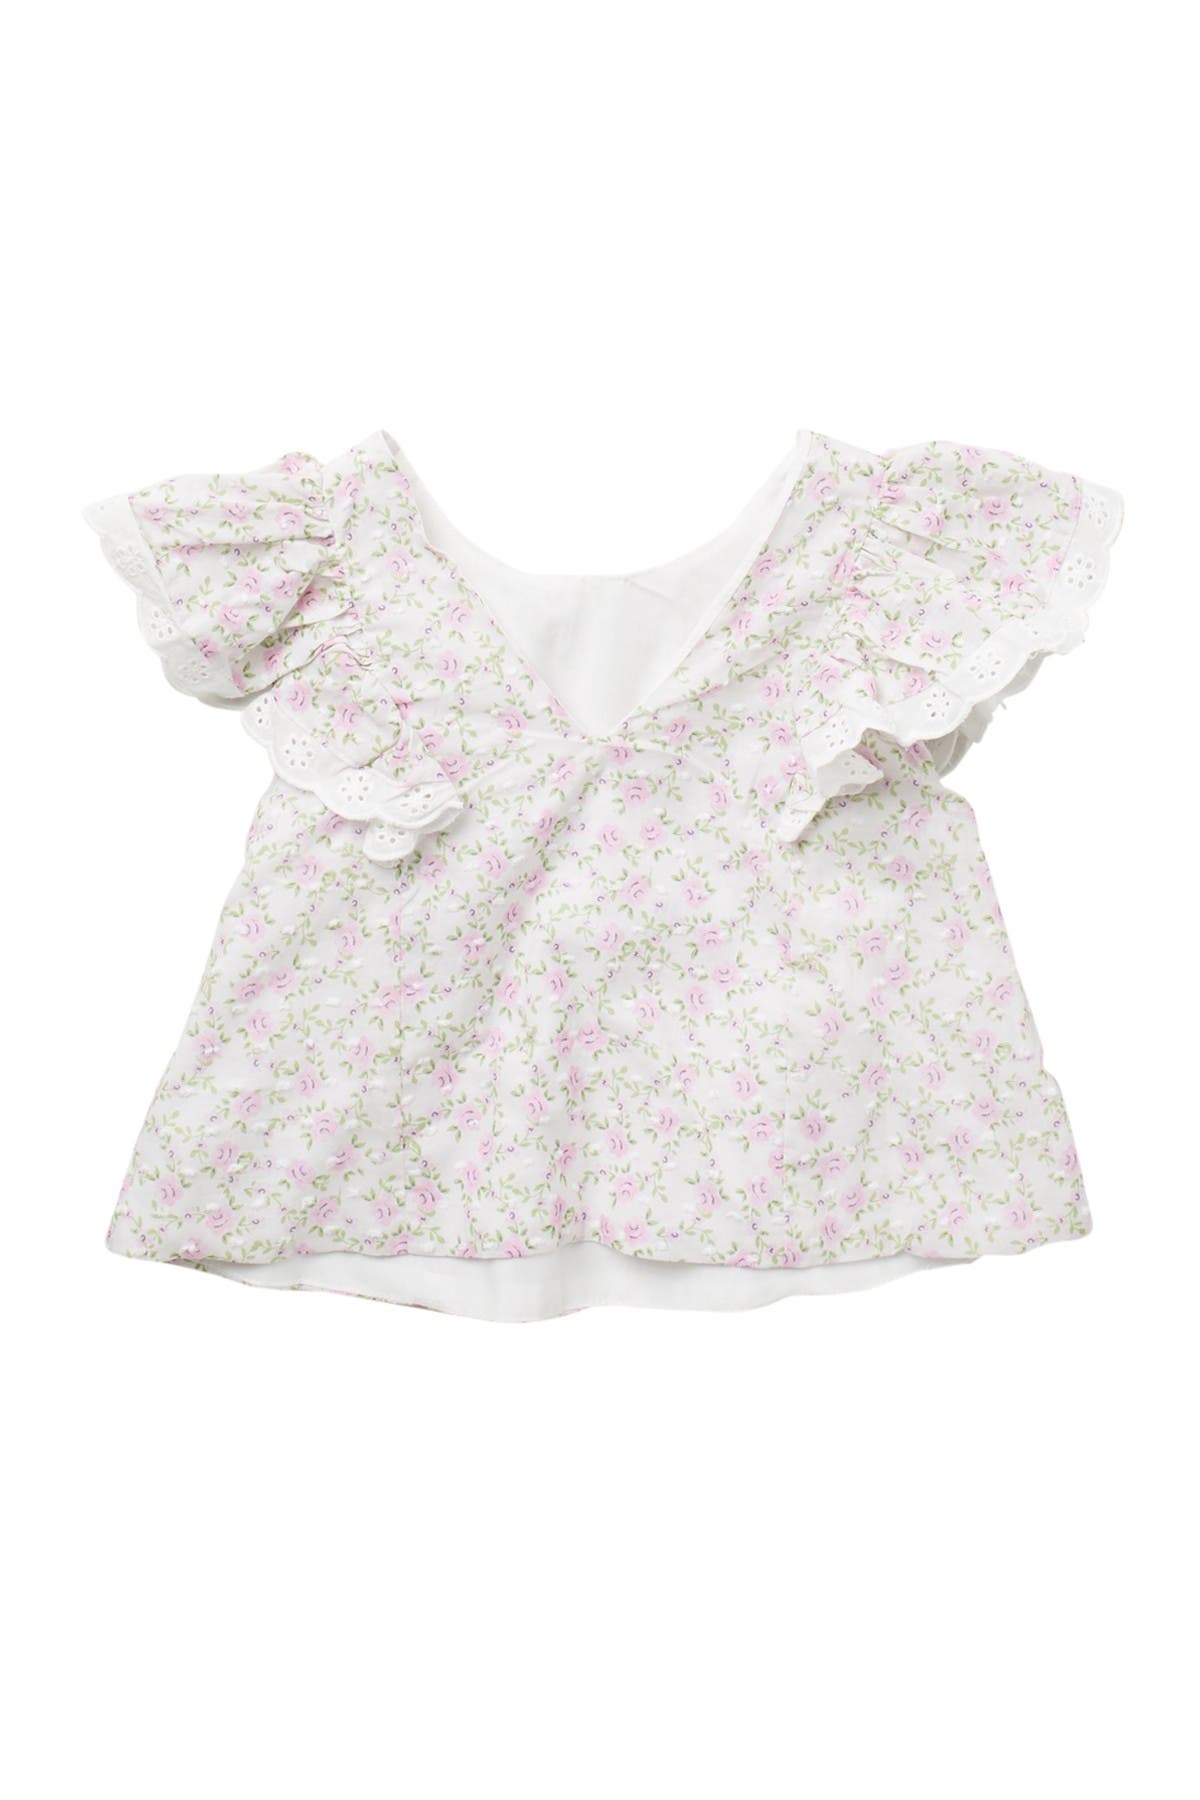 Pastourelle By Pippa And Julie Kids' Ditzy Floral 2-piece Set In Pink/ivory